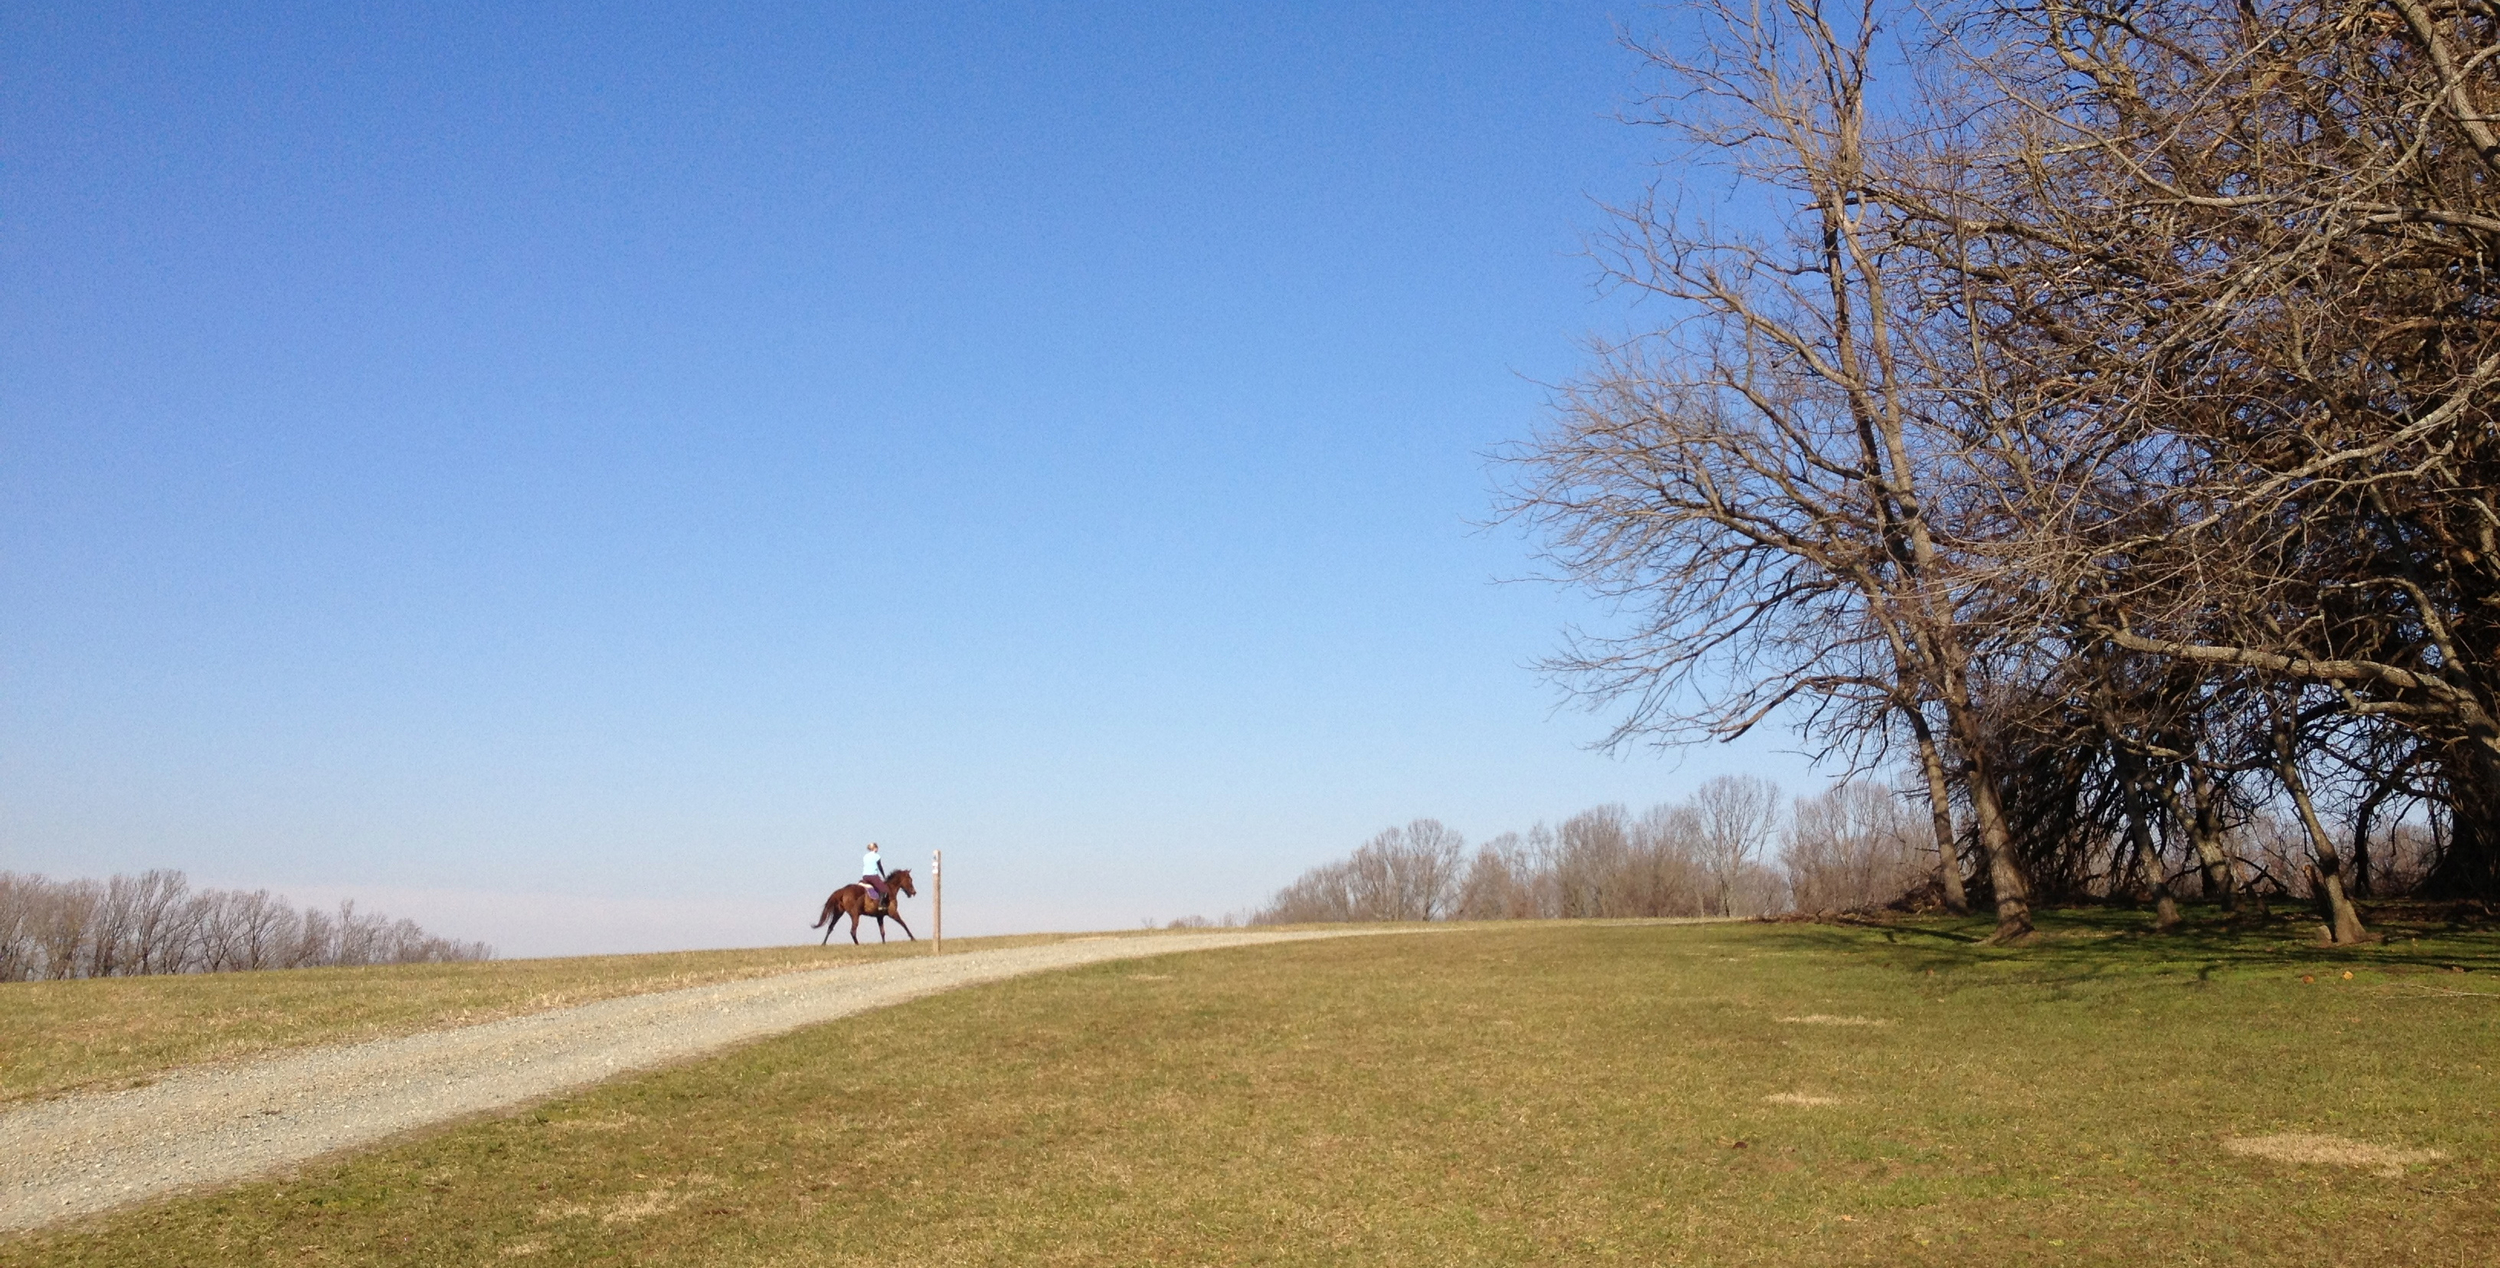 January can't get better than this - a perfect afternoon in Fair Hill